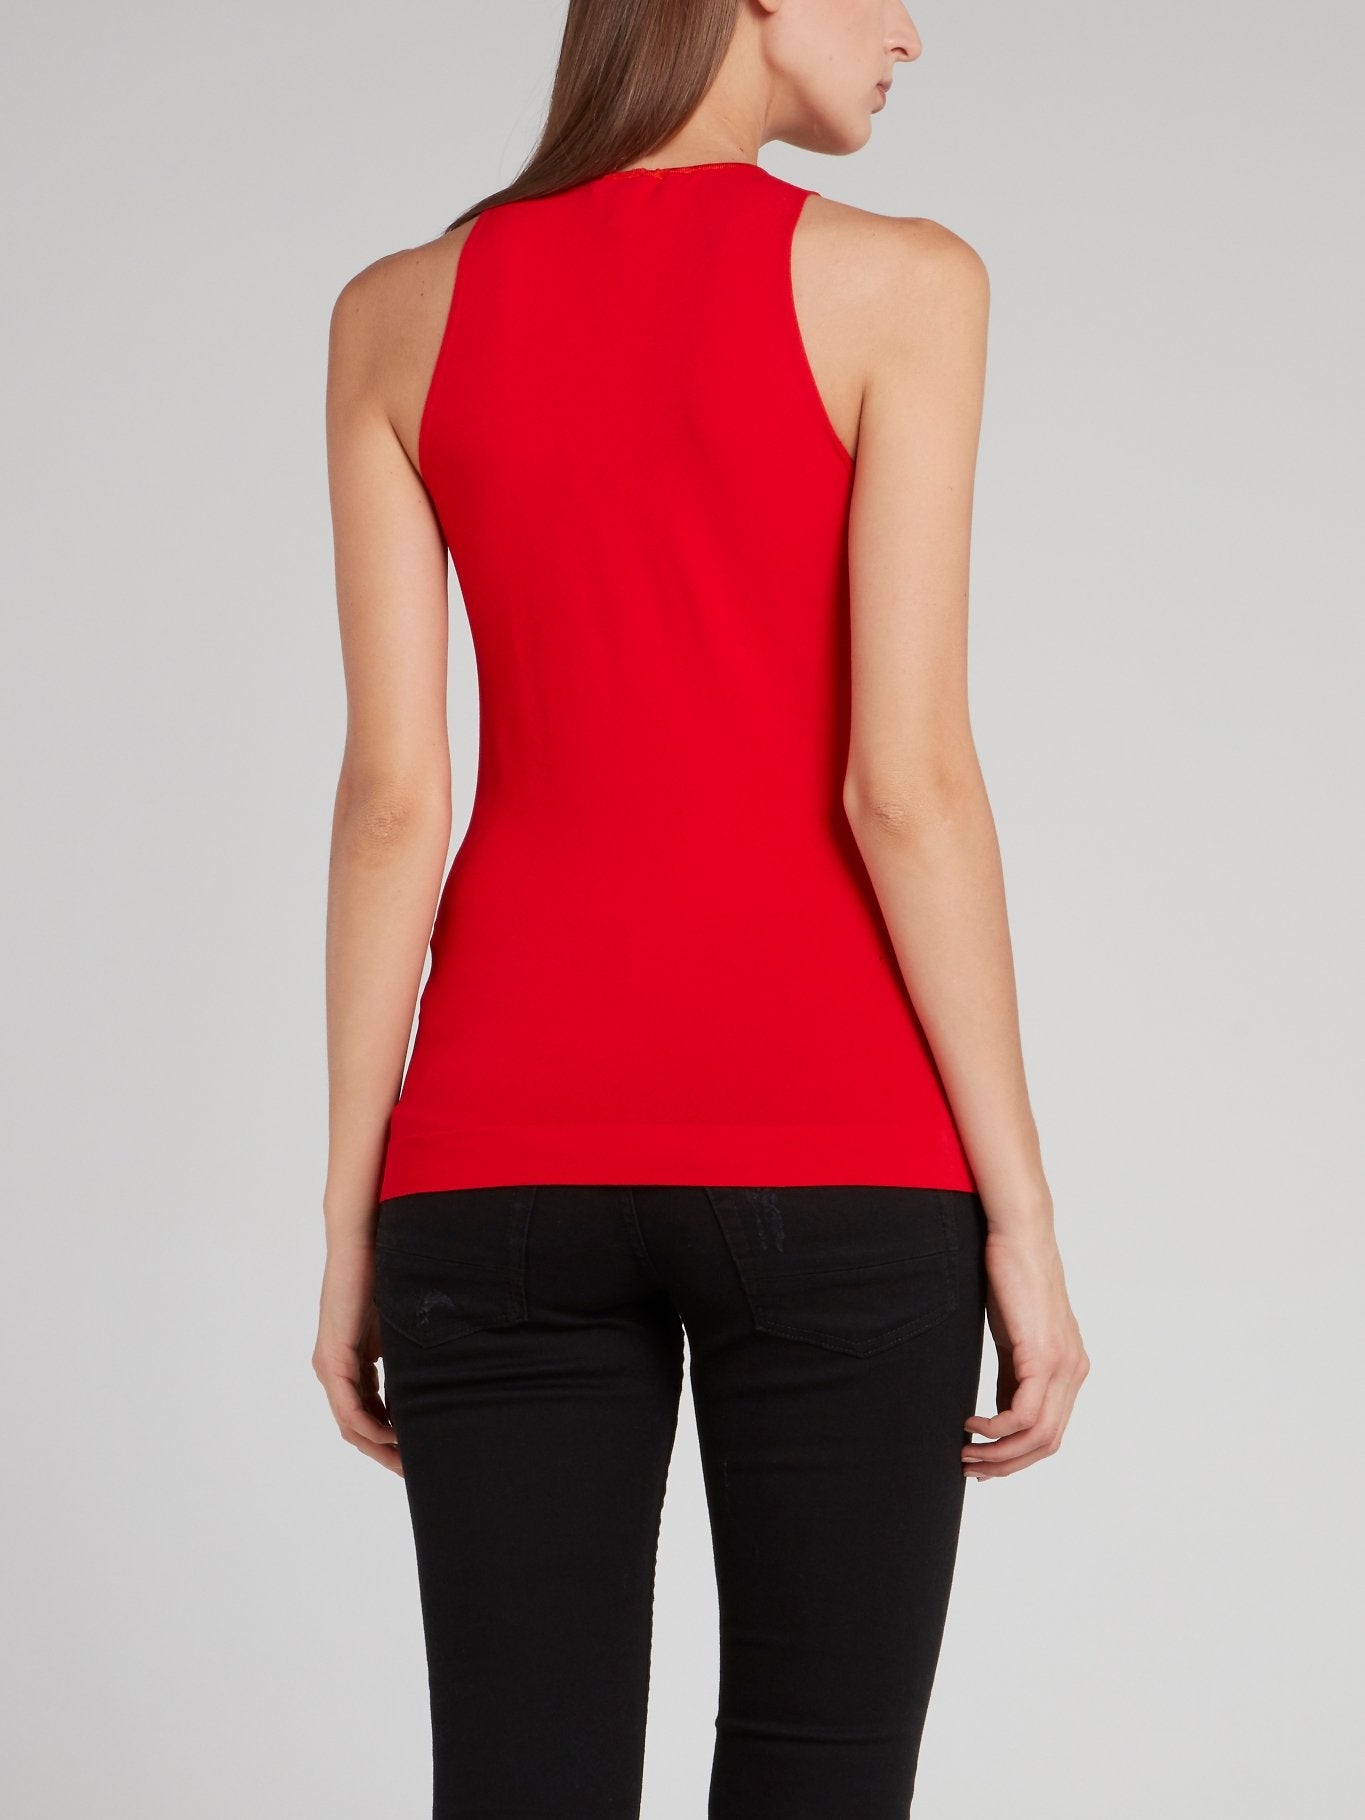 Red Criss Cross Plunge Tank Top